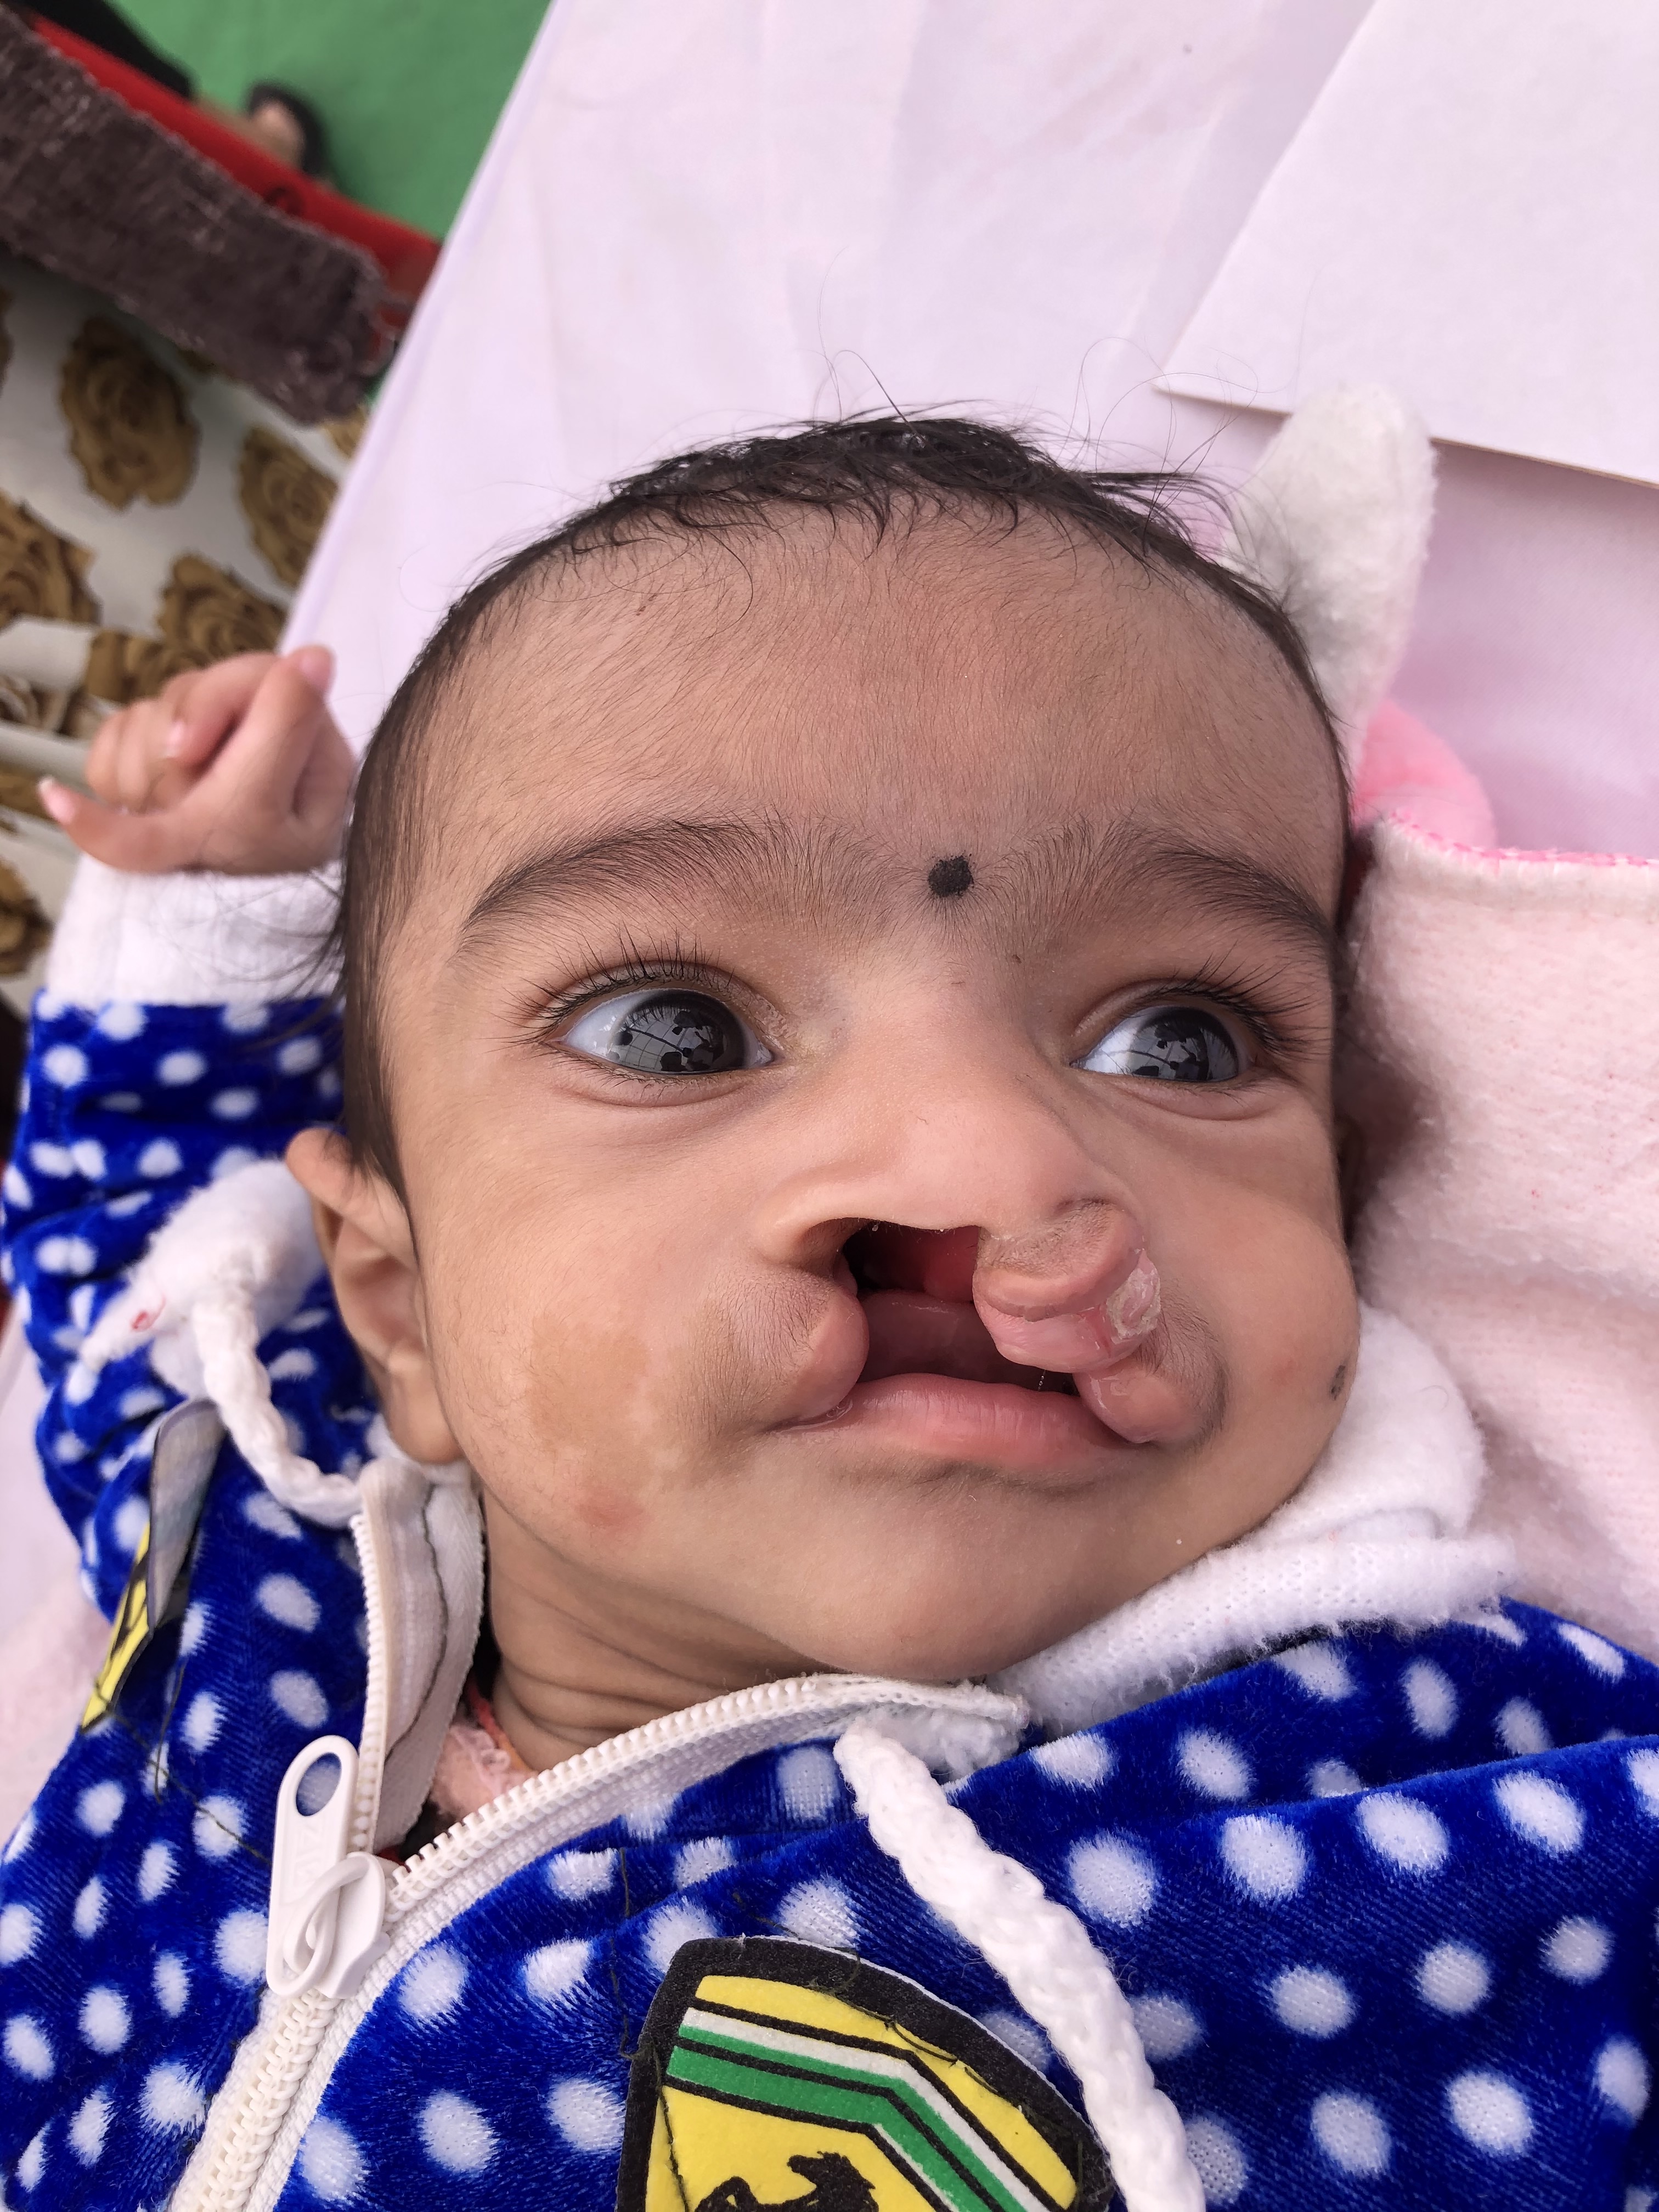 Patient with a bilateral, complete cleft lip and palate. Involves both primary and secondary palate, as well as lip. Note the protuberance of the premaxillary segment.